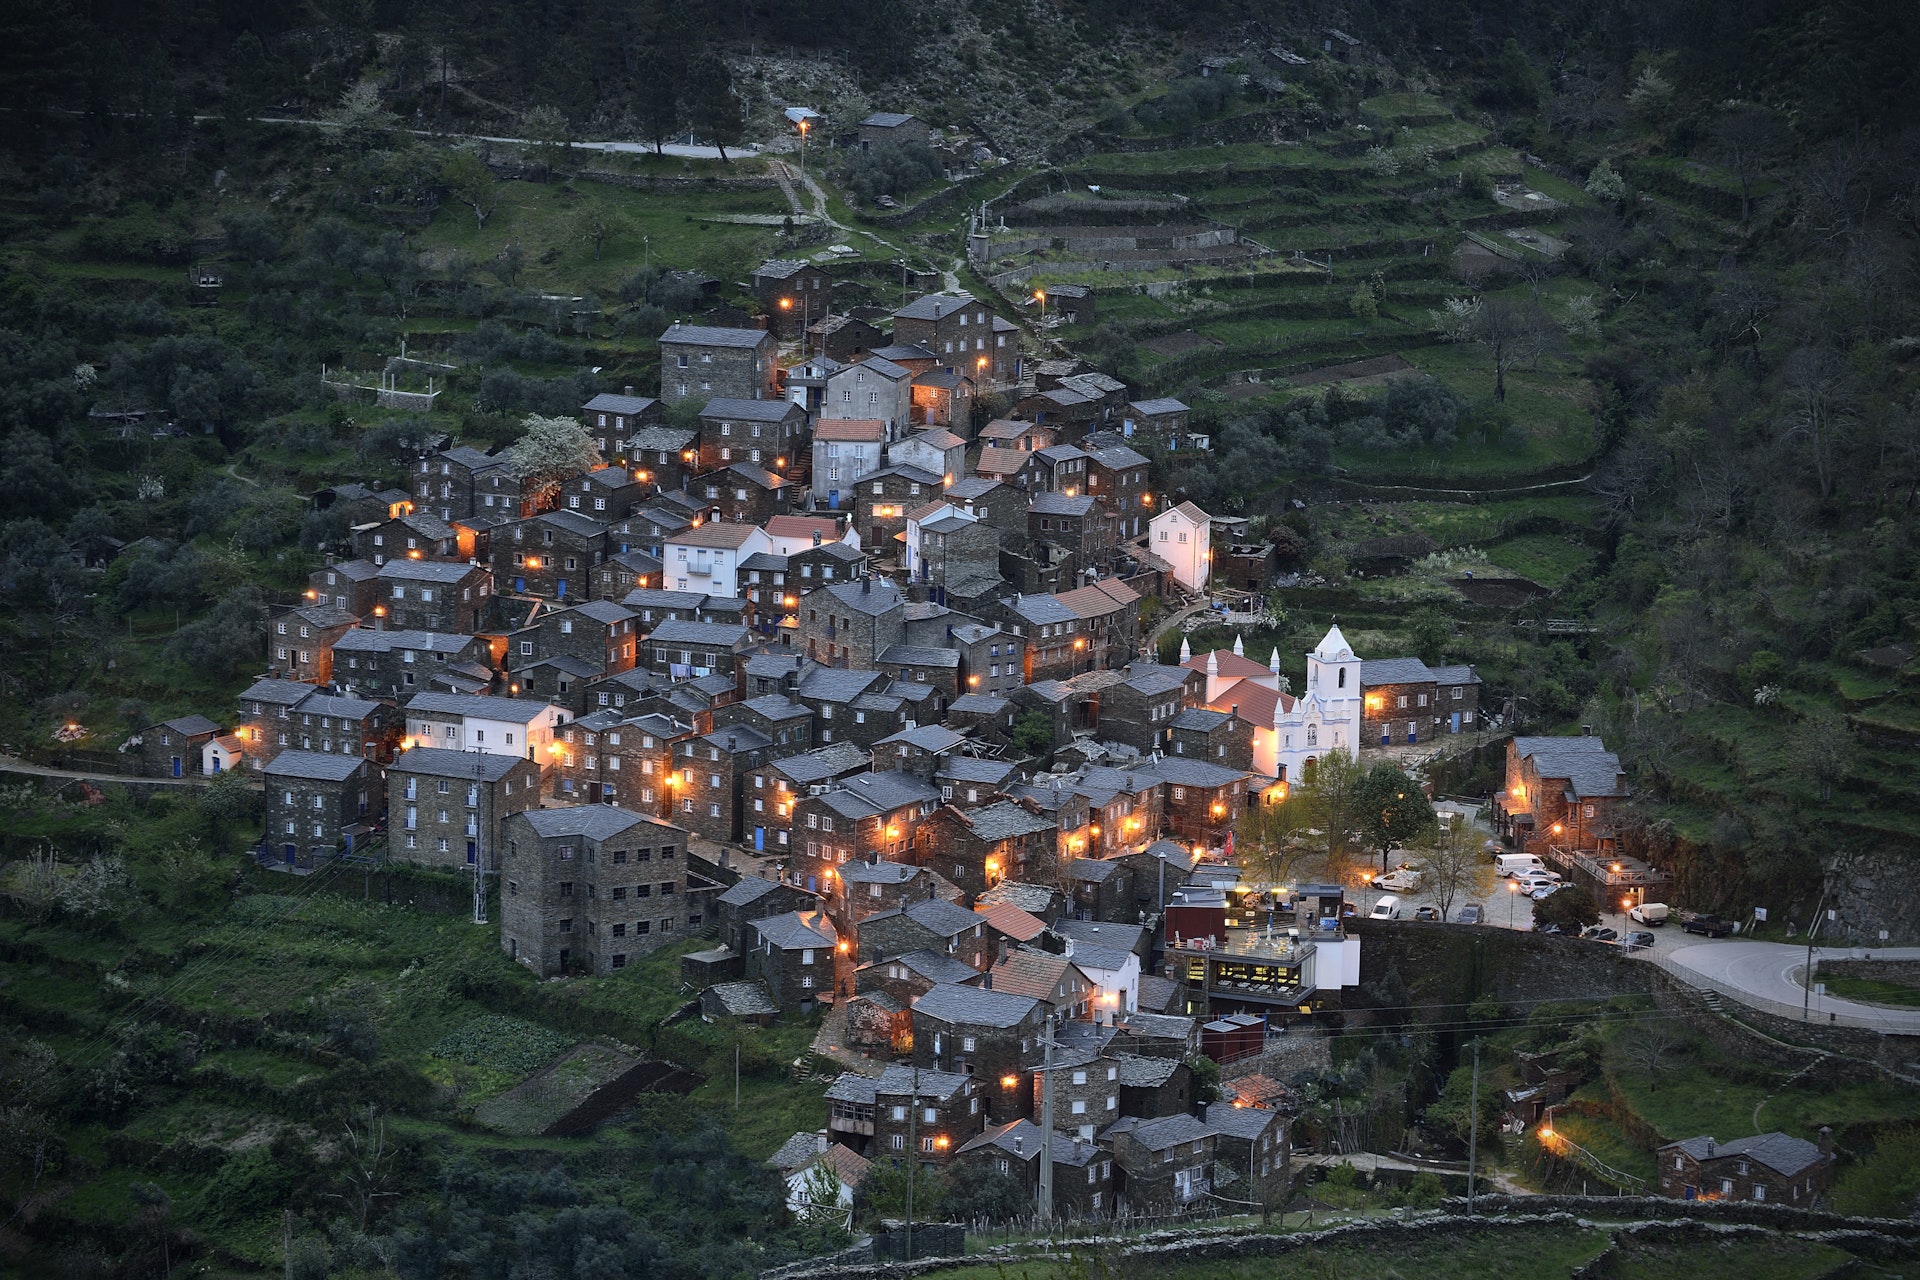 The village of Piódão in Portugal. The rural mountain village is built on a steep slope, and consists of a number of traditional stone houses.